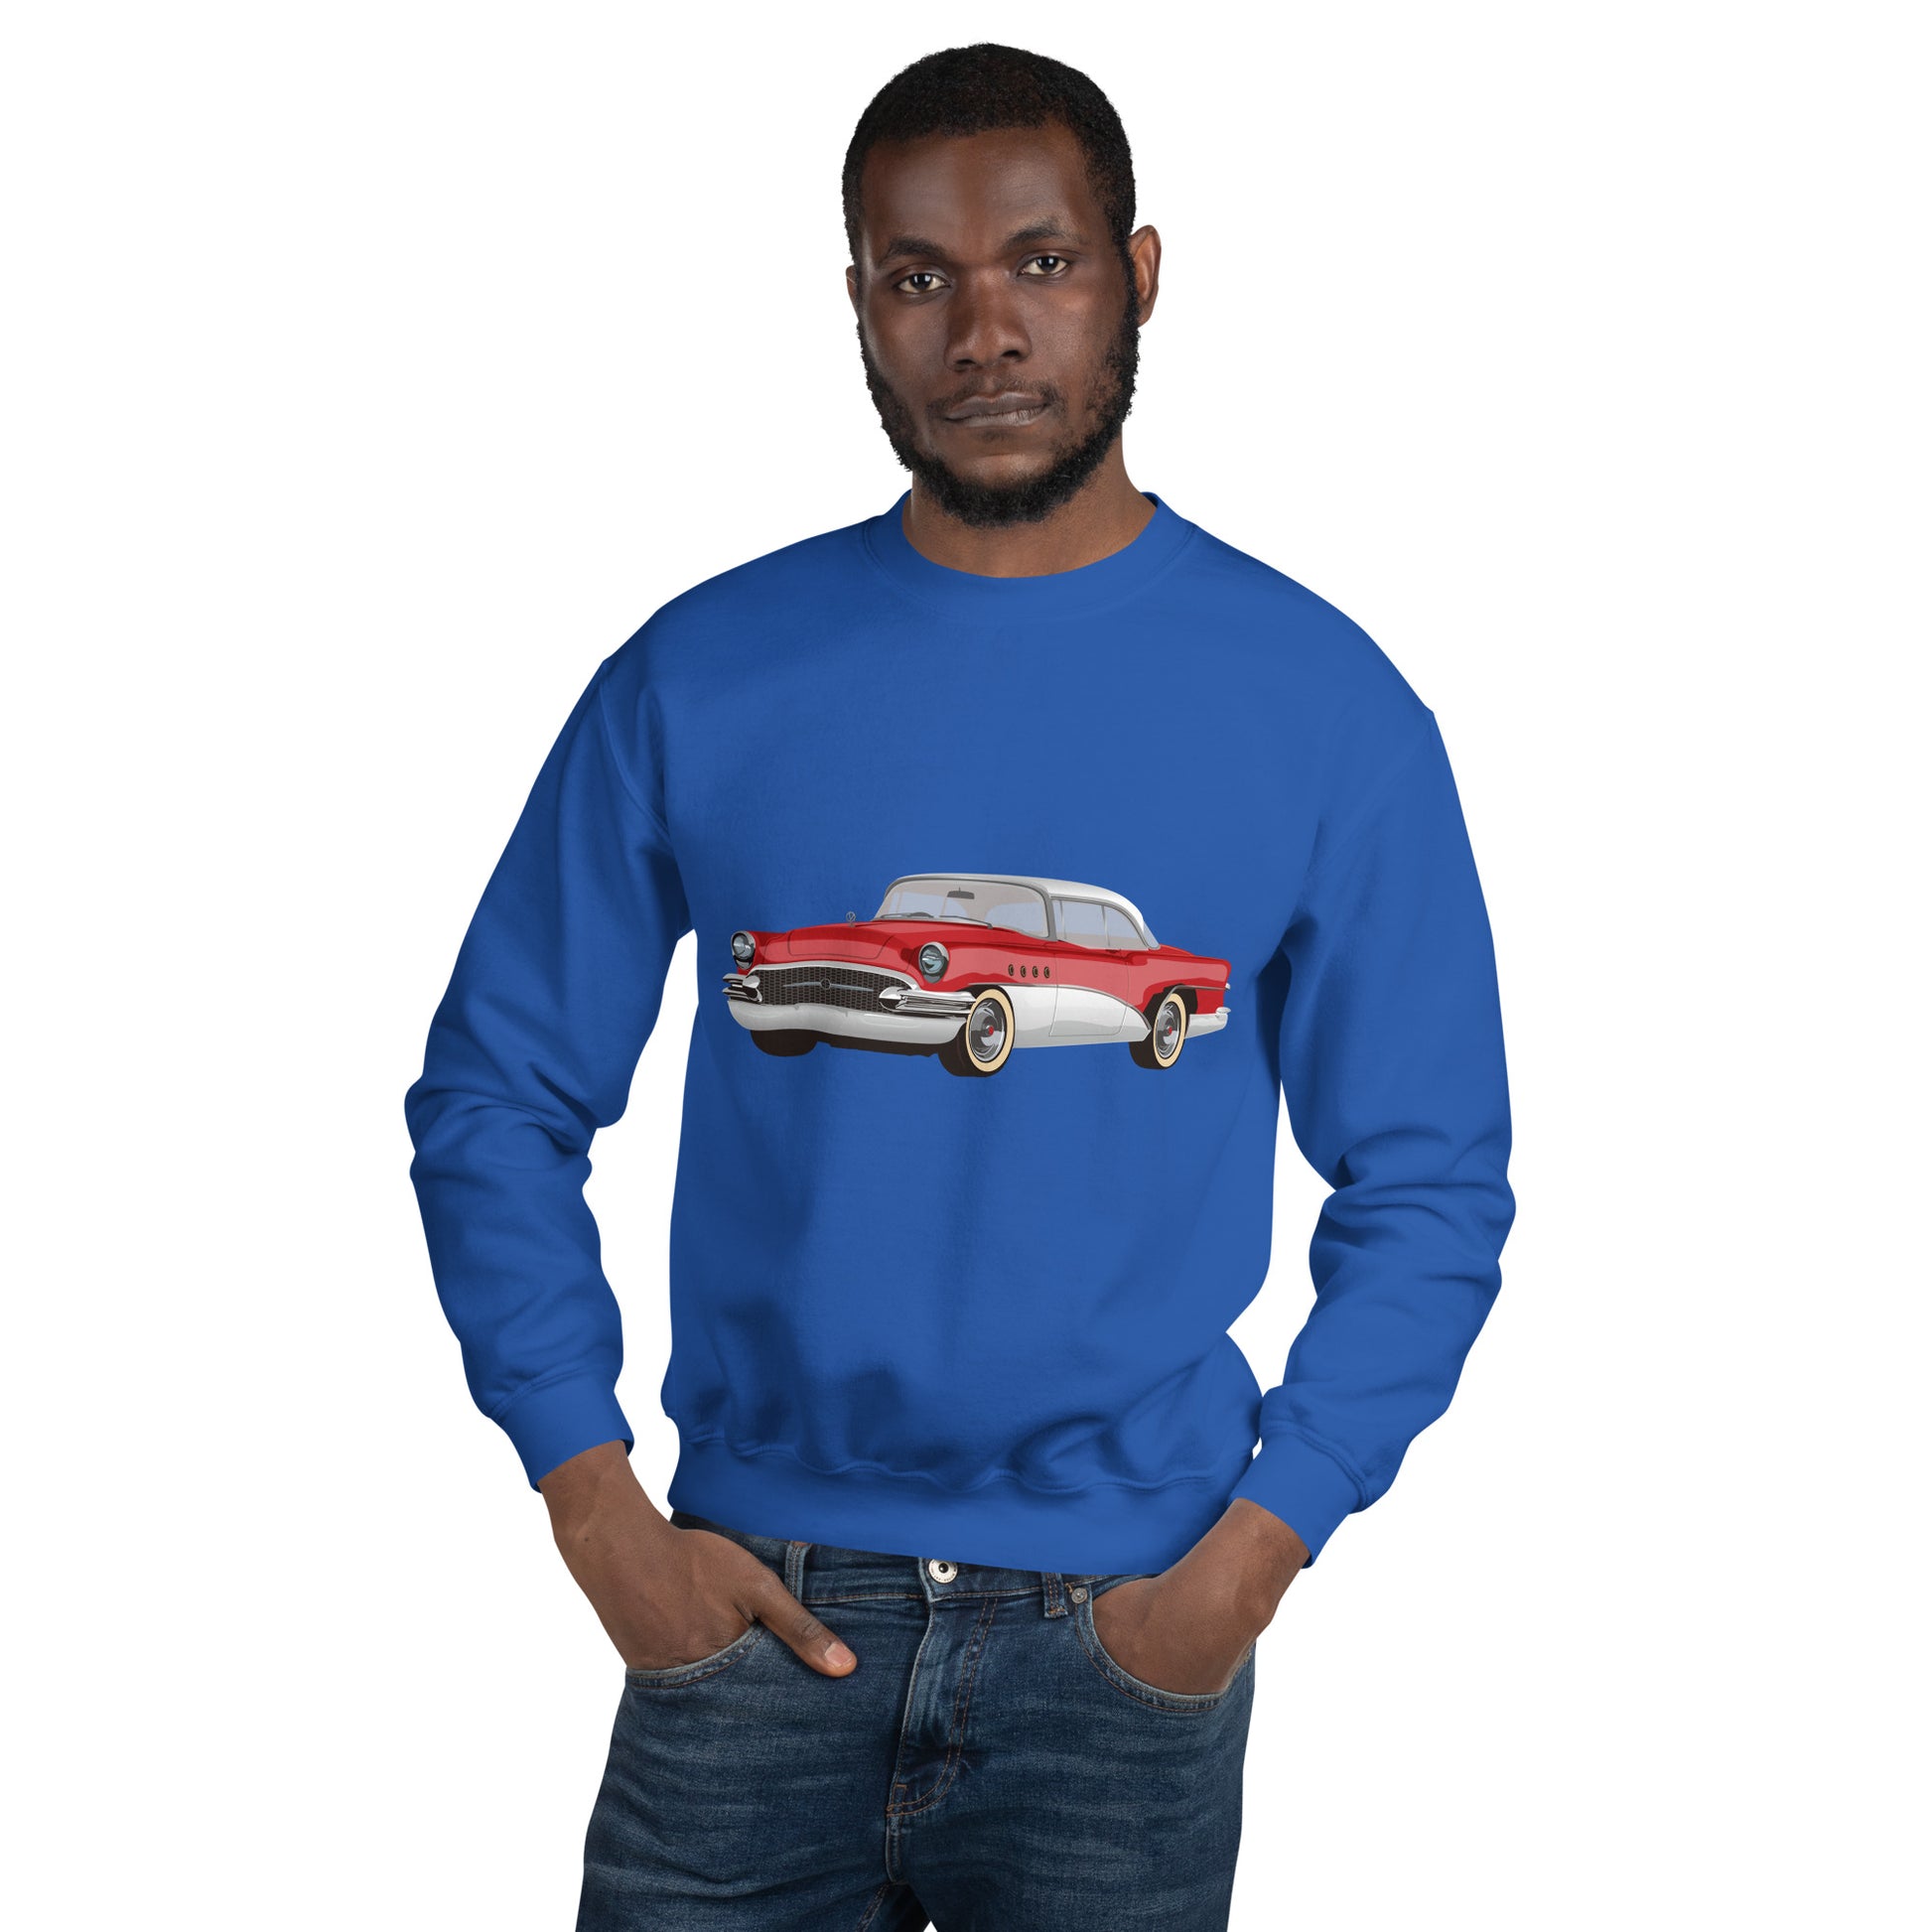 Man with royal blue sweatshirt with red chevrolet